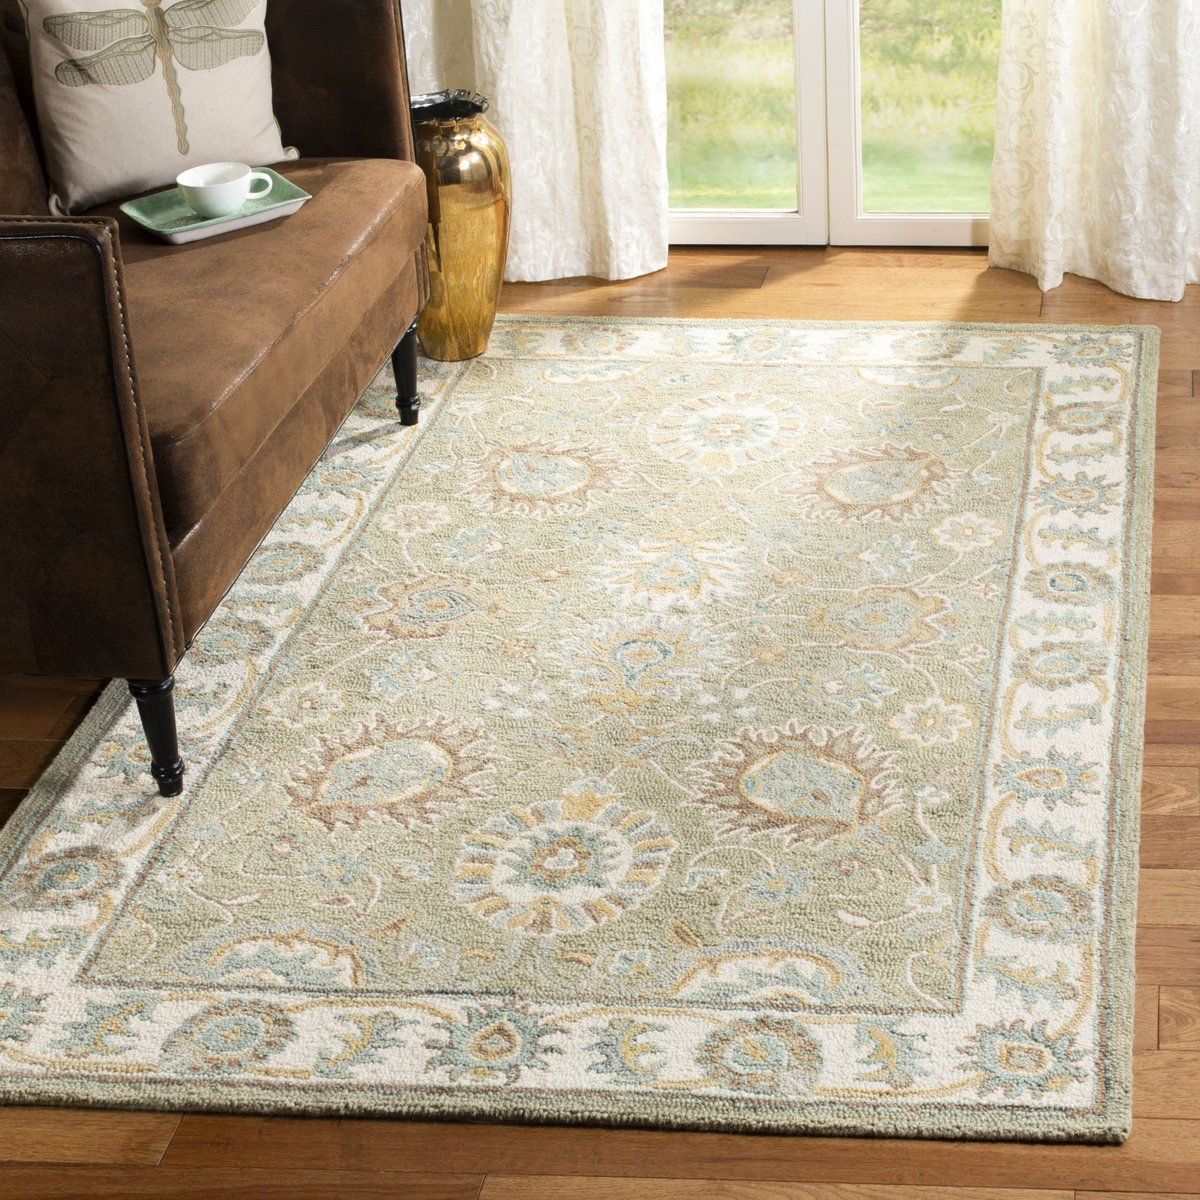 Safavieh Blossom Blm 702 Rugs | Rugs Direct Within Ivory Blossom Rugs (View 8 of 15)